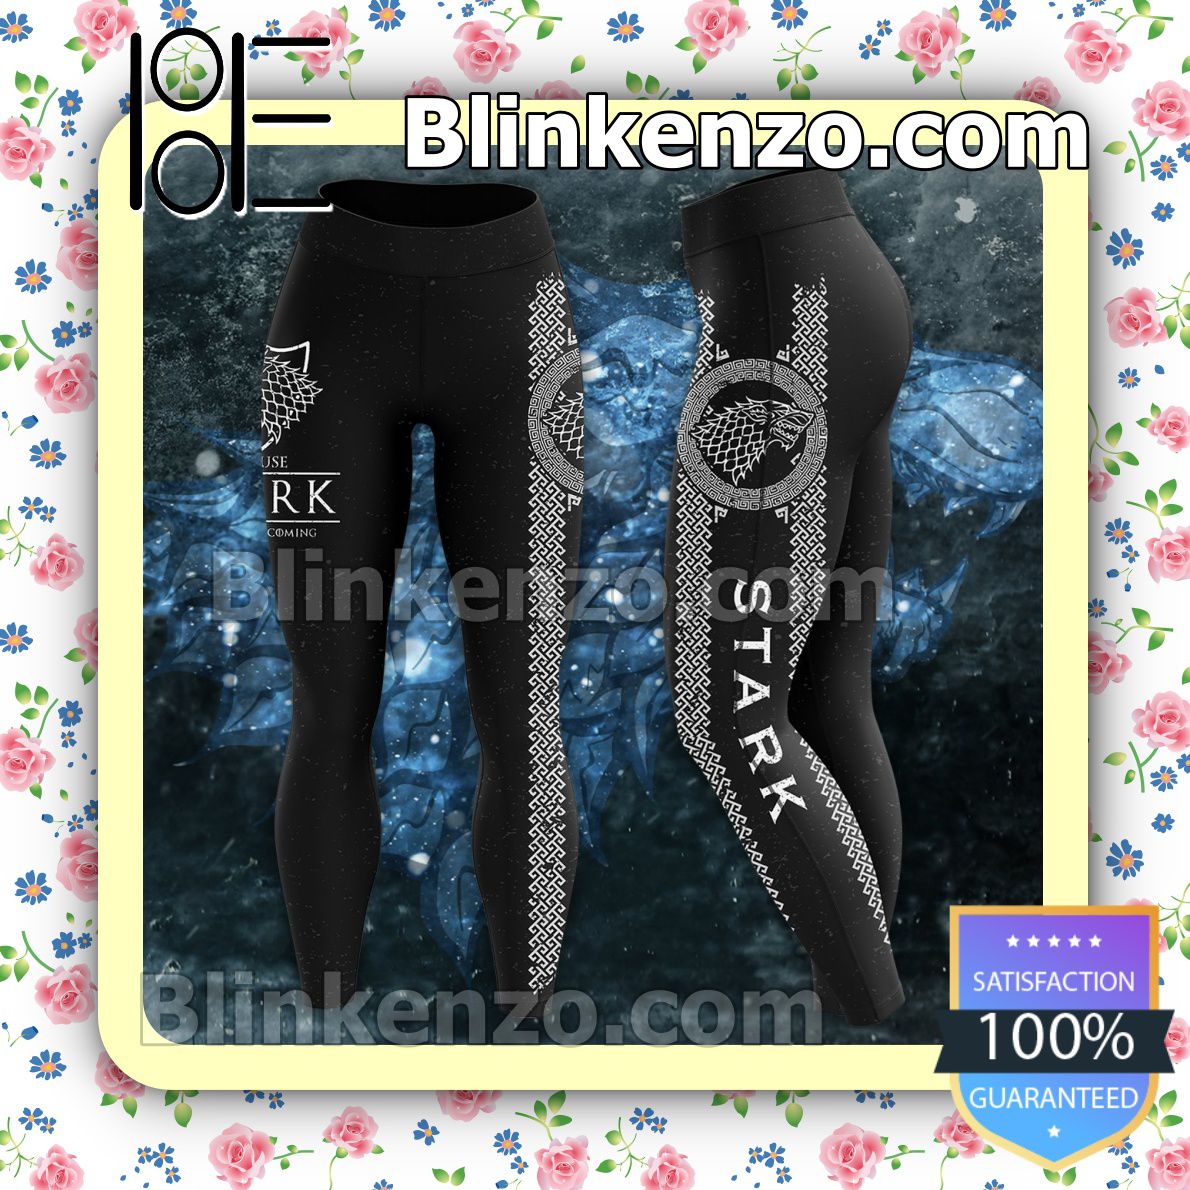 Drop Shipping House Stark Winter Is Coming Game Of Thrones Black Workout Leggings